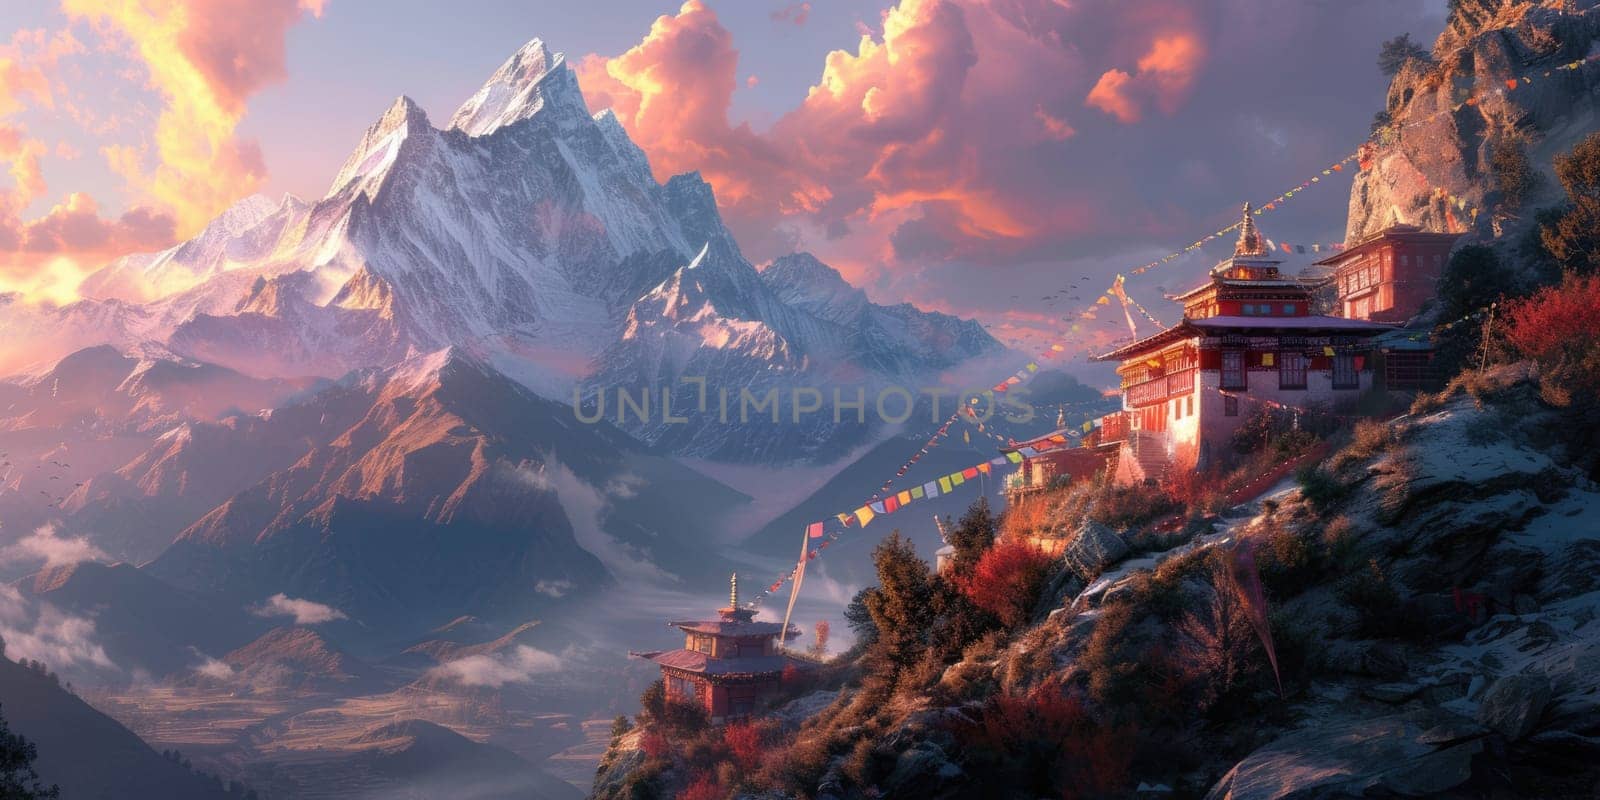 A serene temple adorned with colorful prayer flags stands against the backdrop of majestic snowy mountains illuminated by the sunrise. Resplendent.